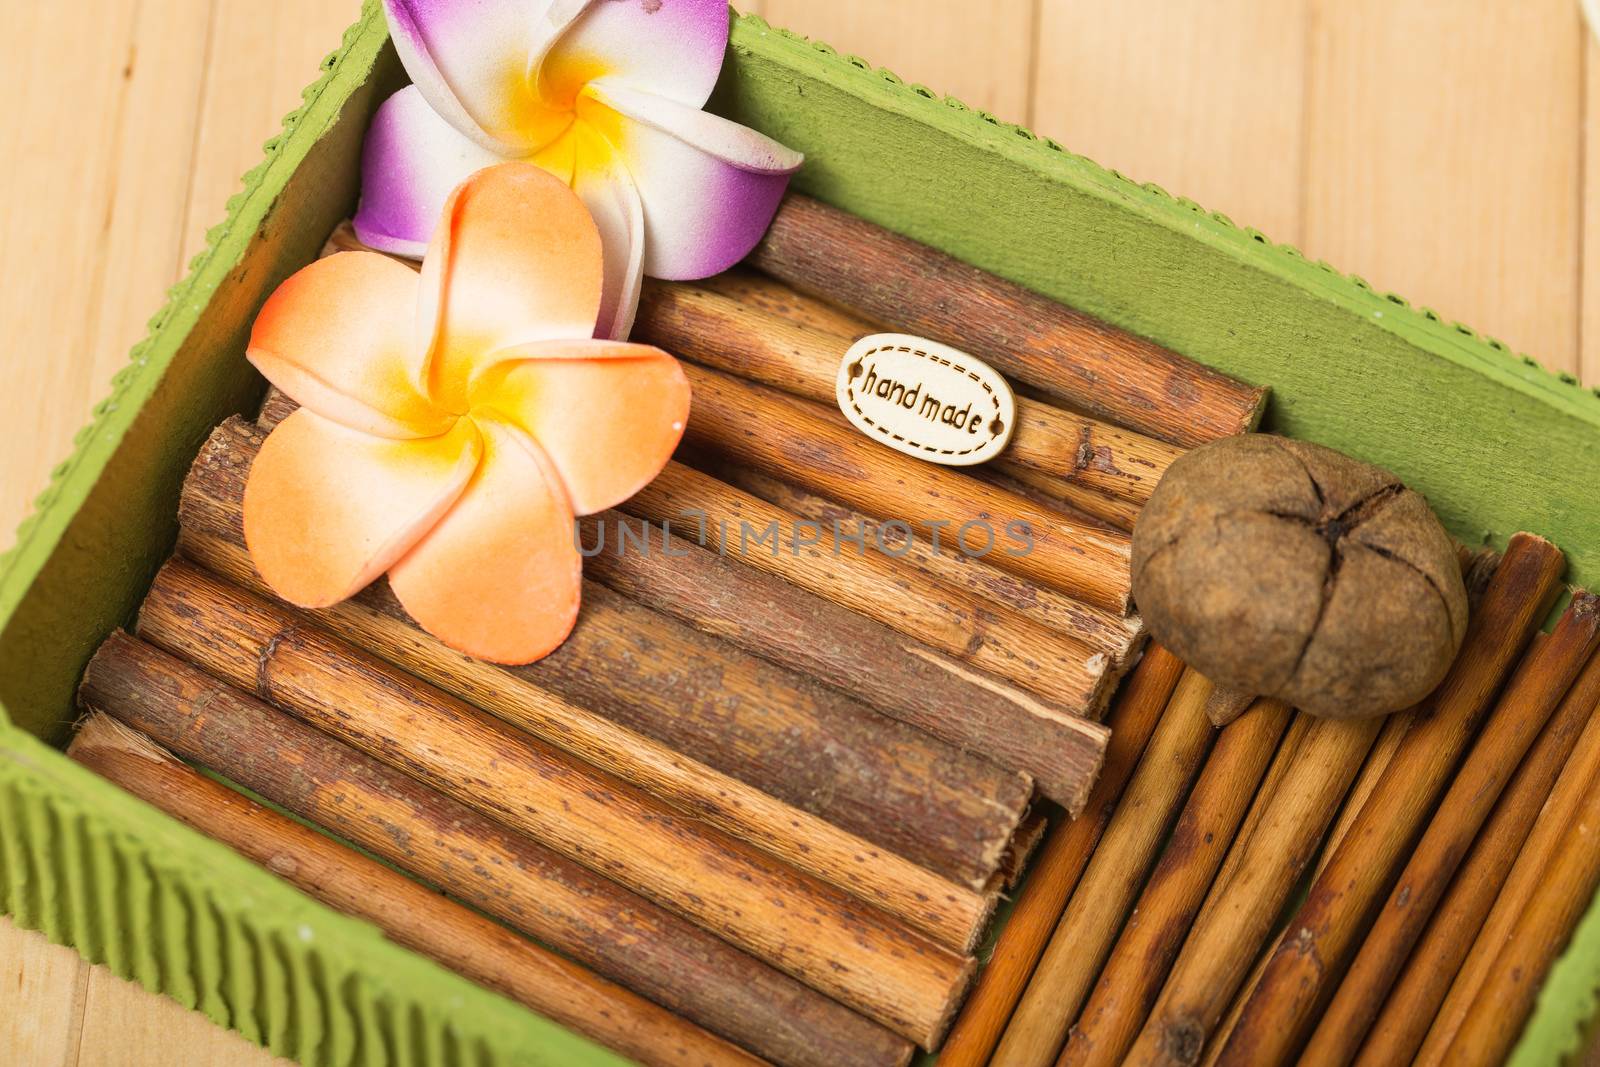 Accessories for scrapbooking in a box of sticks, flowers